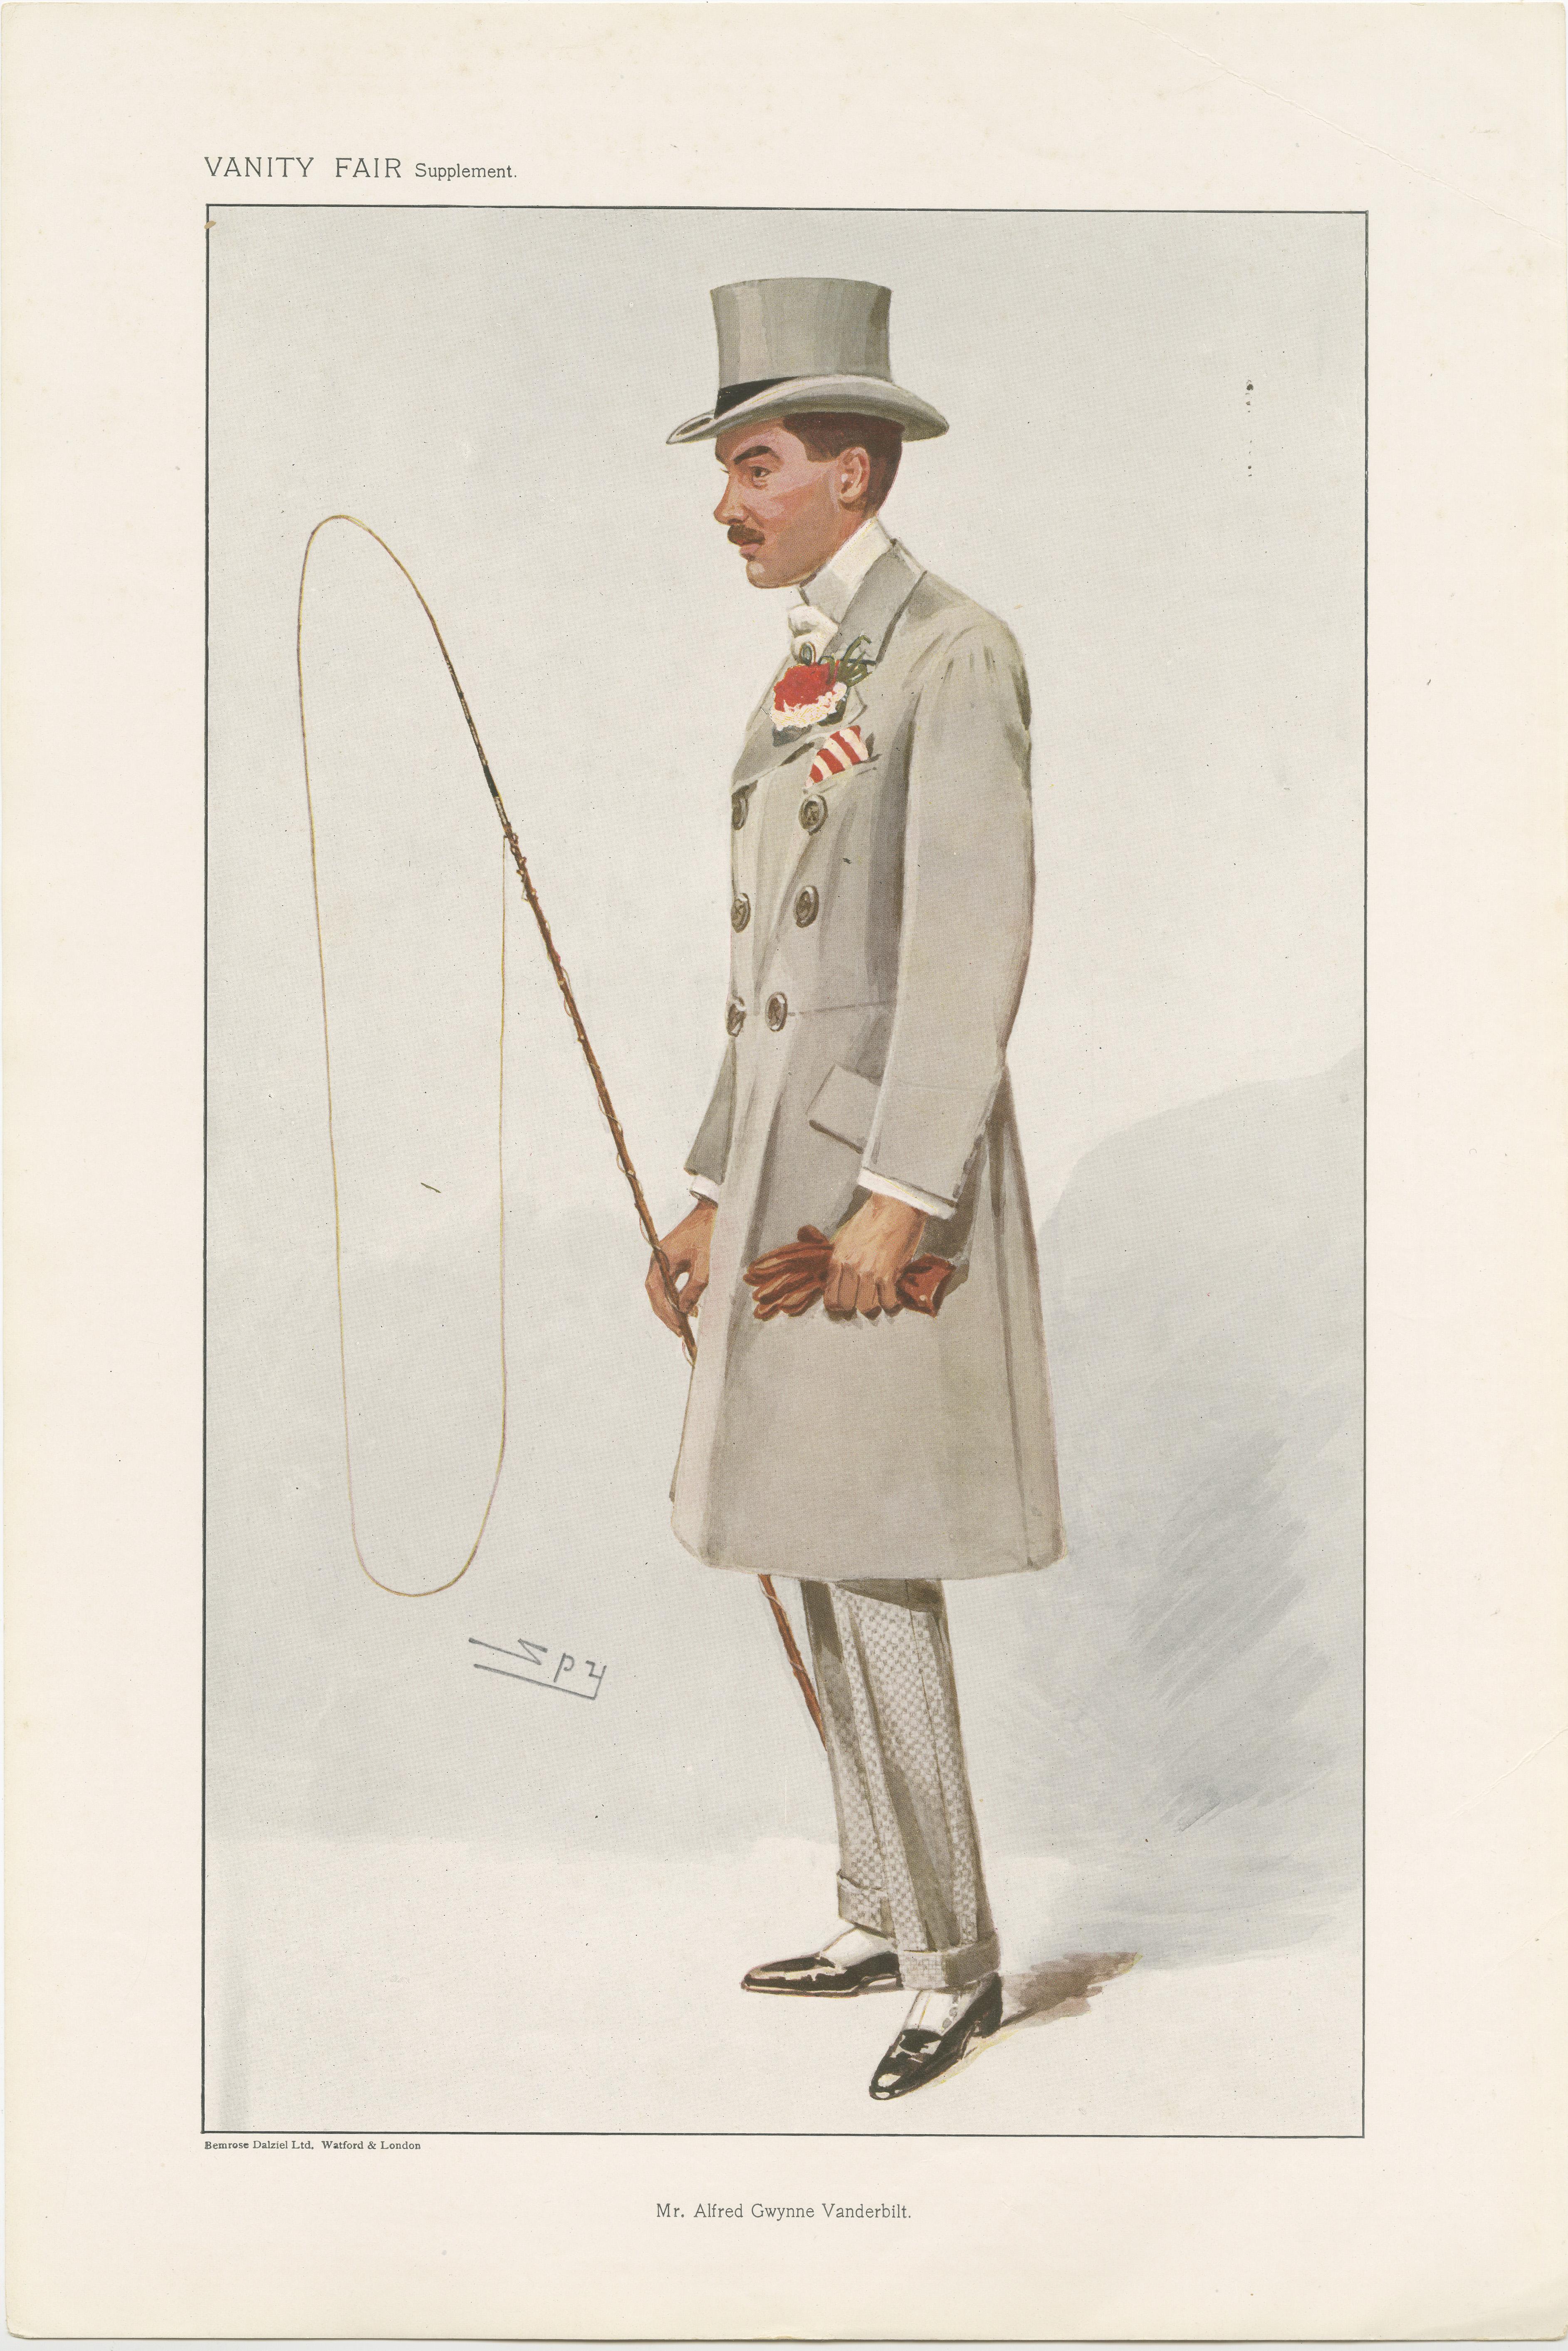 Chromolithograph titled 'Mr. Alfred Gwynne Vanderbilt'. Lithograph of Alfred Gwynne Vanderbilt Sr. a wealthy American businessman, and a member of the Vanderbilt family. A sportsman, he participated in and pioneered a number of related endeavors. He